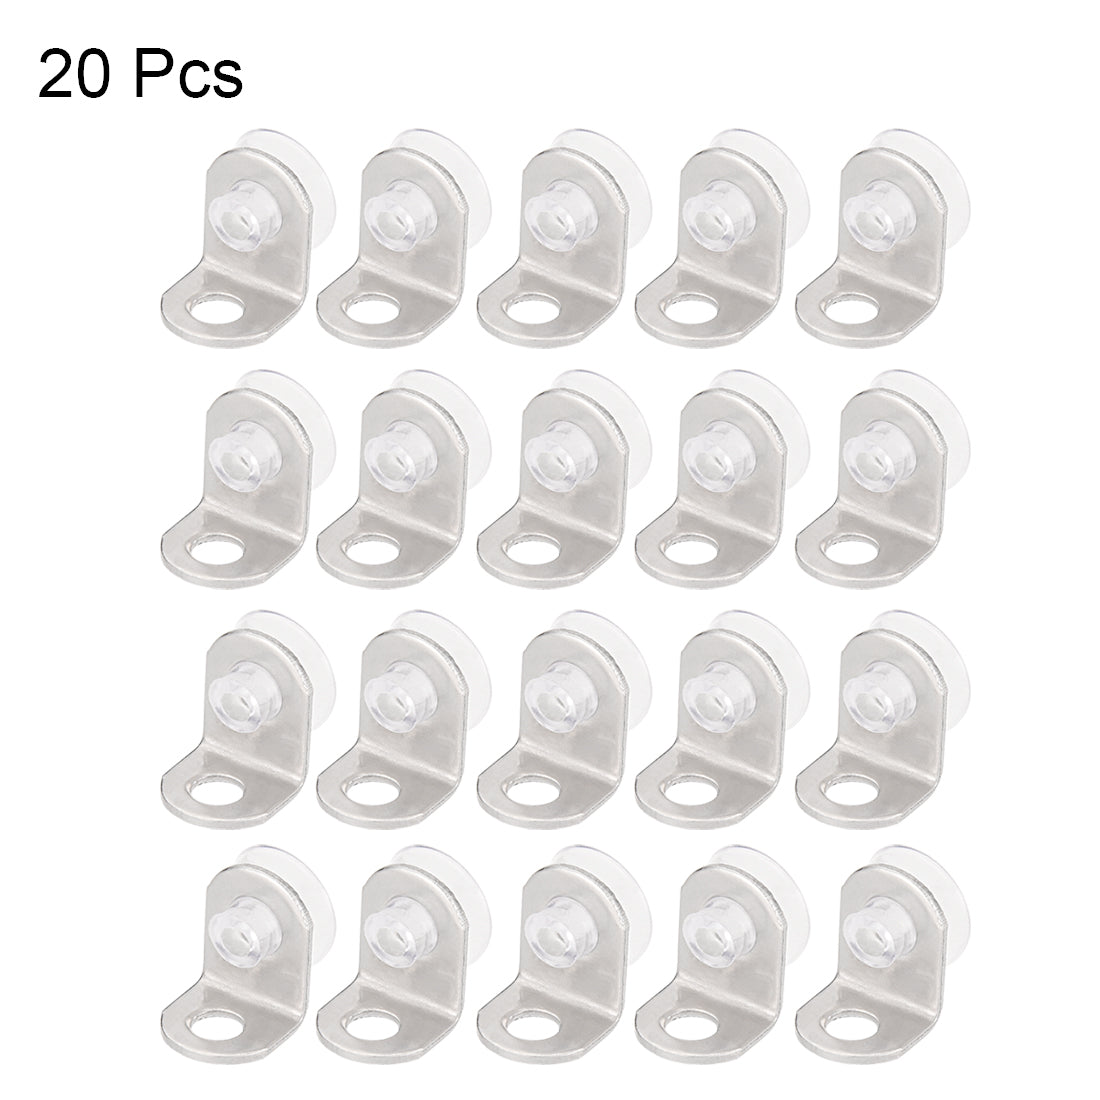 uxcell Uxcell Glass Shelf 15mm x 11mm x 12mm Fixing Clip Bracket Holder 90 Degree Right Angle with Suction Cup 20 Pcs